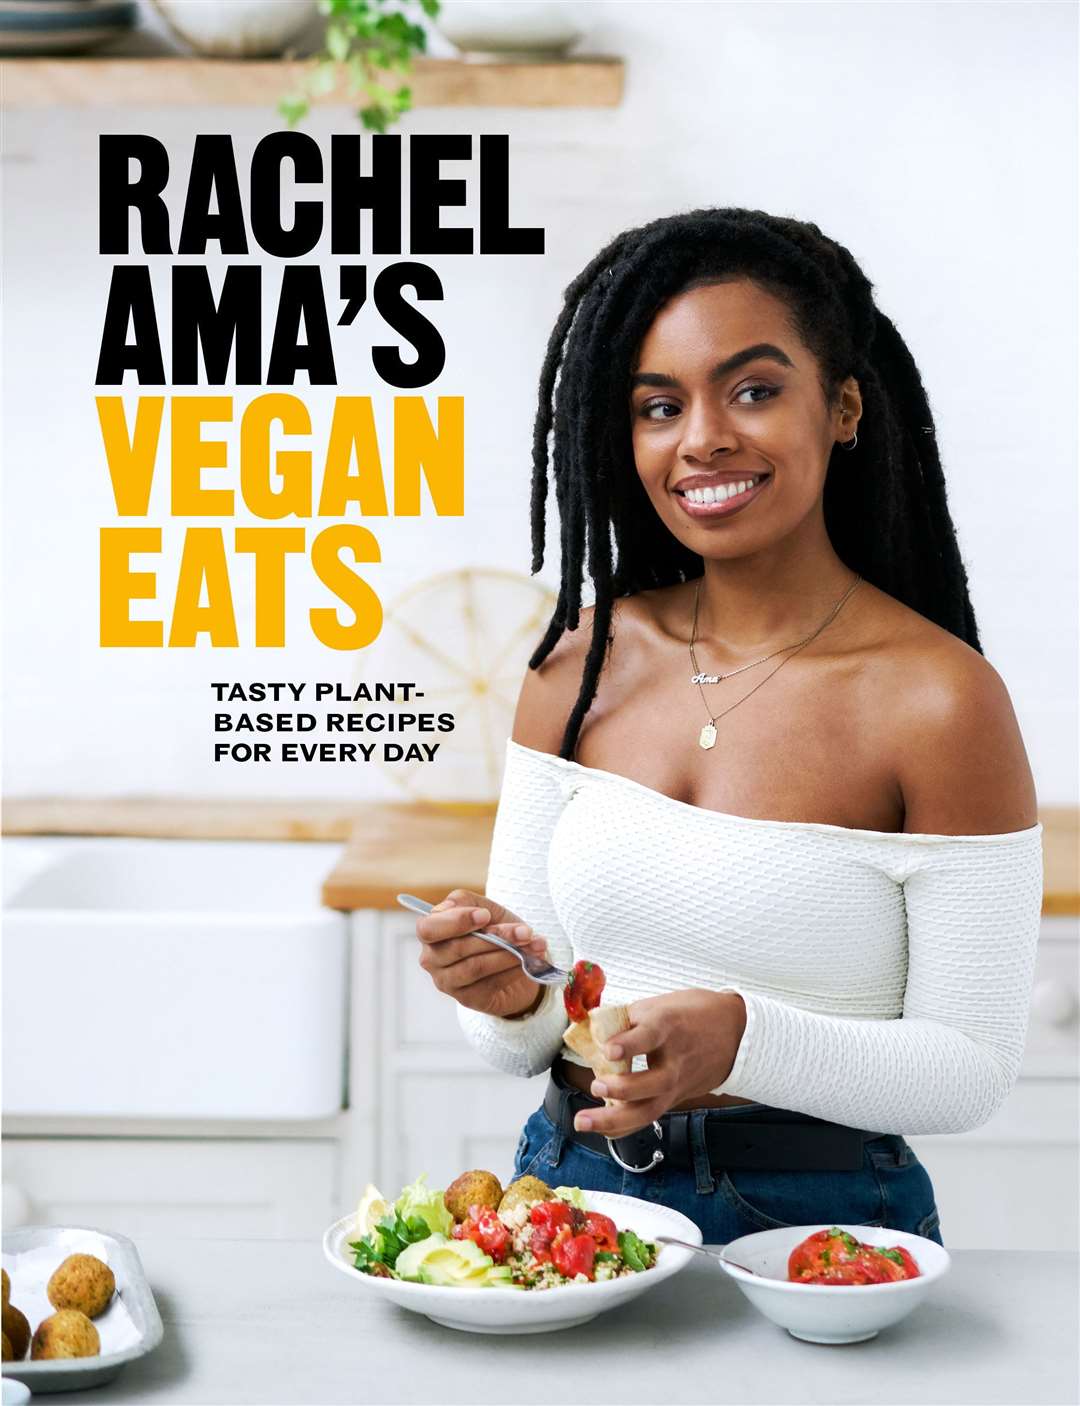 Rachel Ama’s Vegan Eats: Tasty Plant-based Recipes For Every Day, is published by Ebury priced £20. Available now.